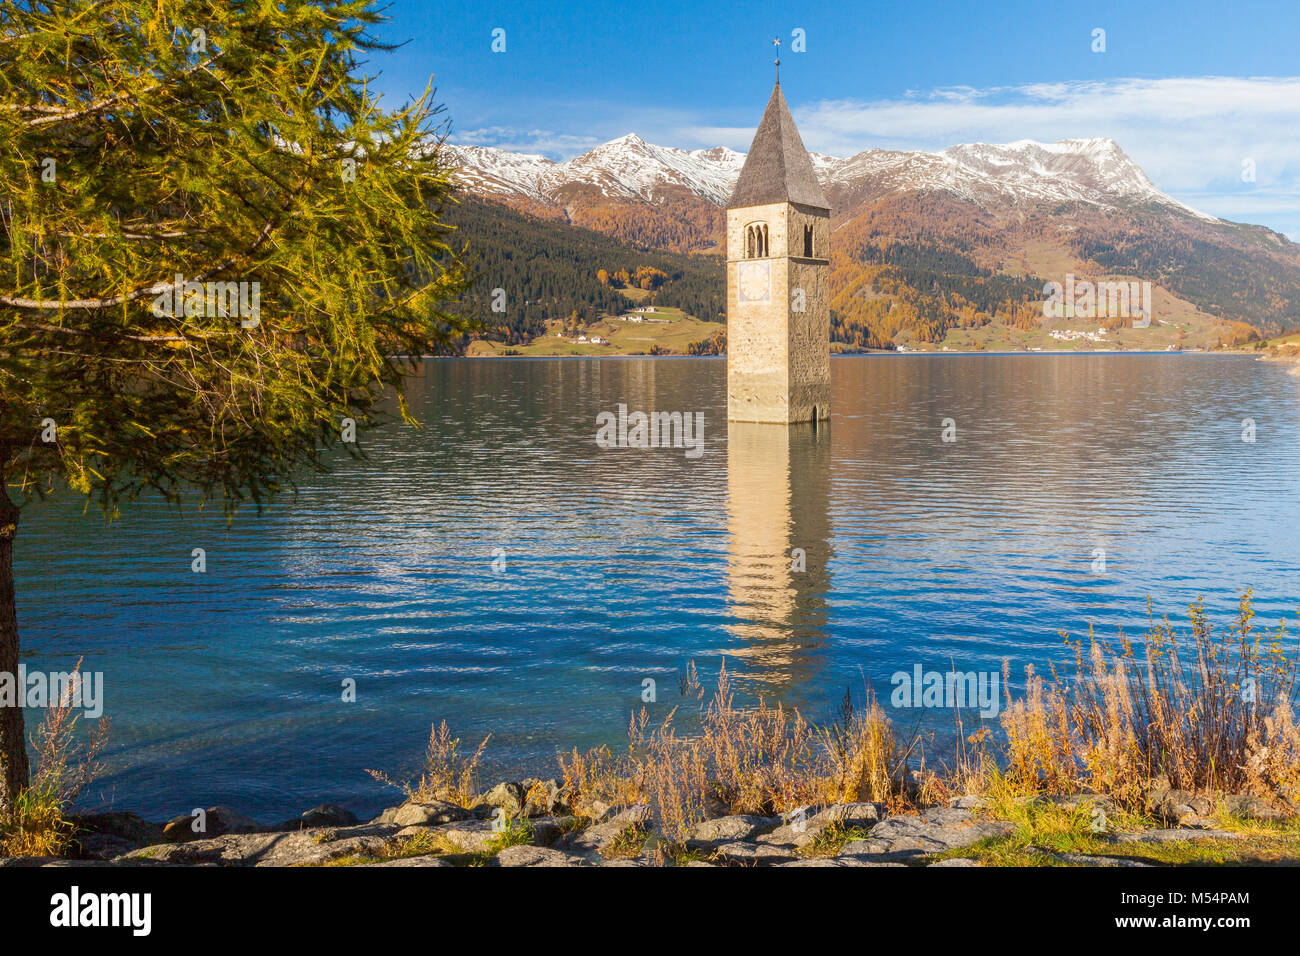 Submerged bell tower in lake resia Italian alps Stock Photo